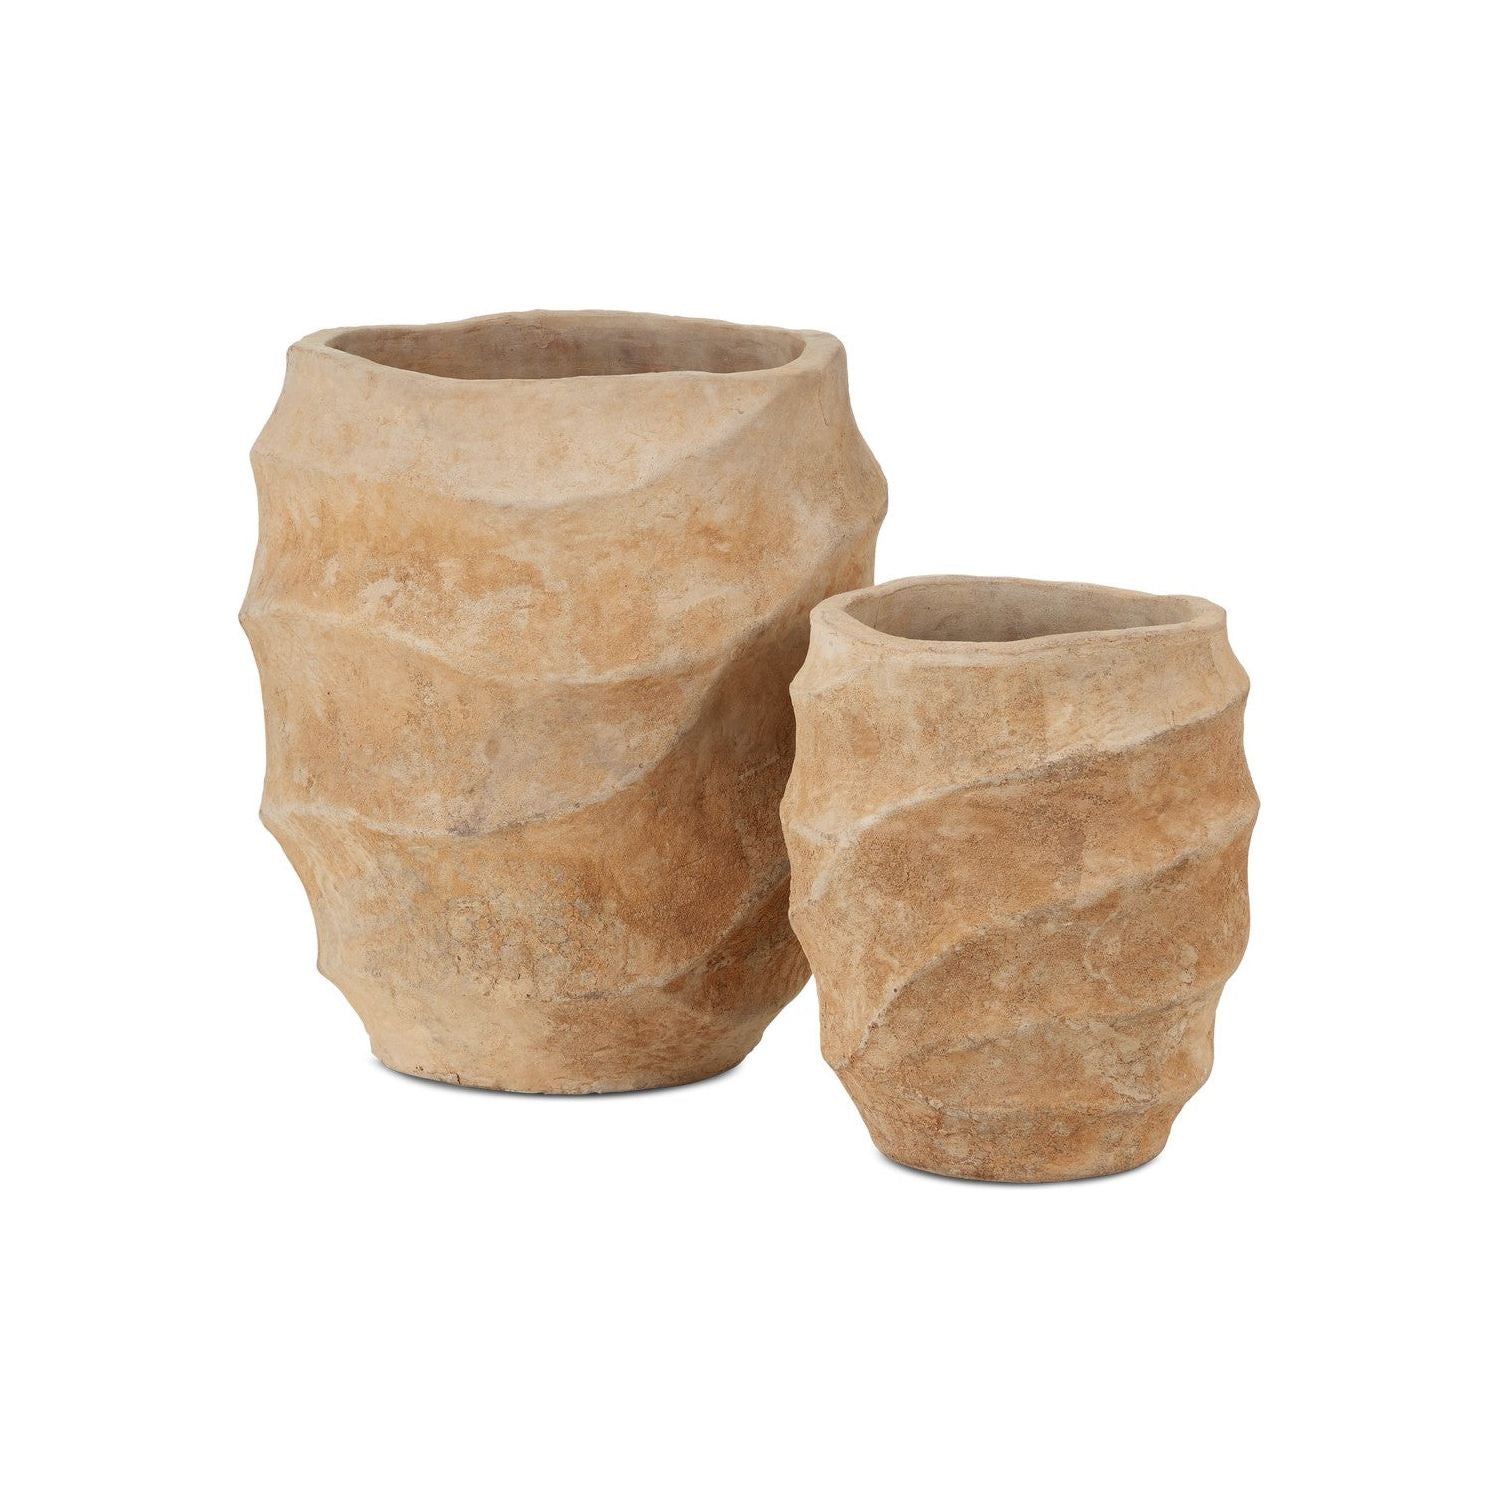 Currey and Company - 2200-0027 - Planter Set of 2 - Antique Sand